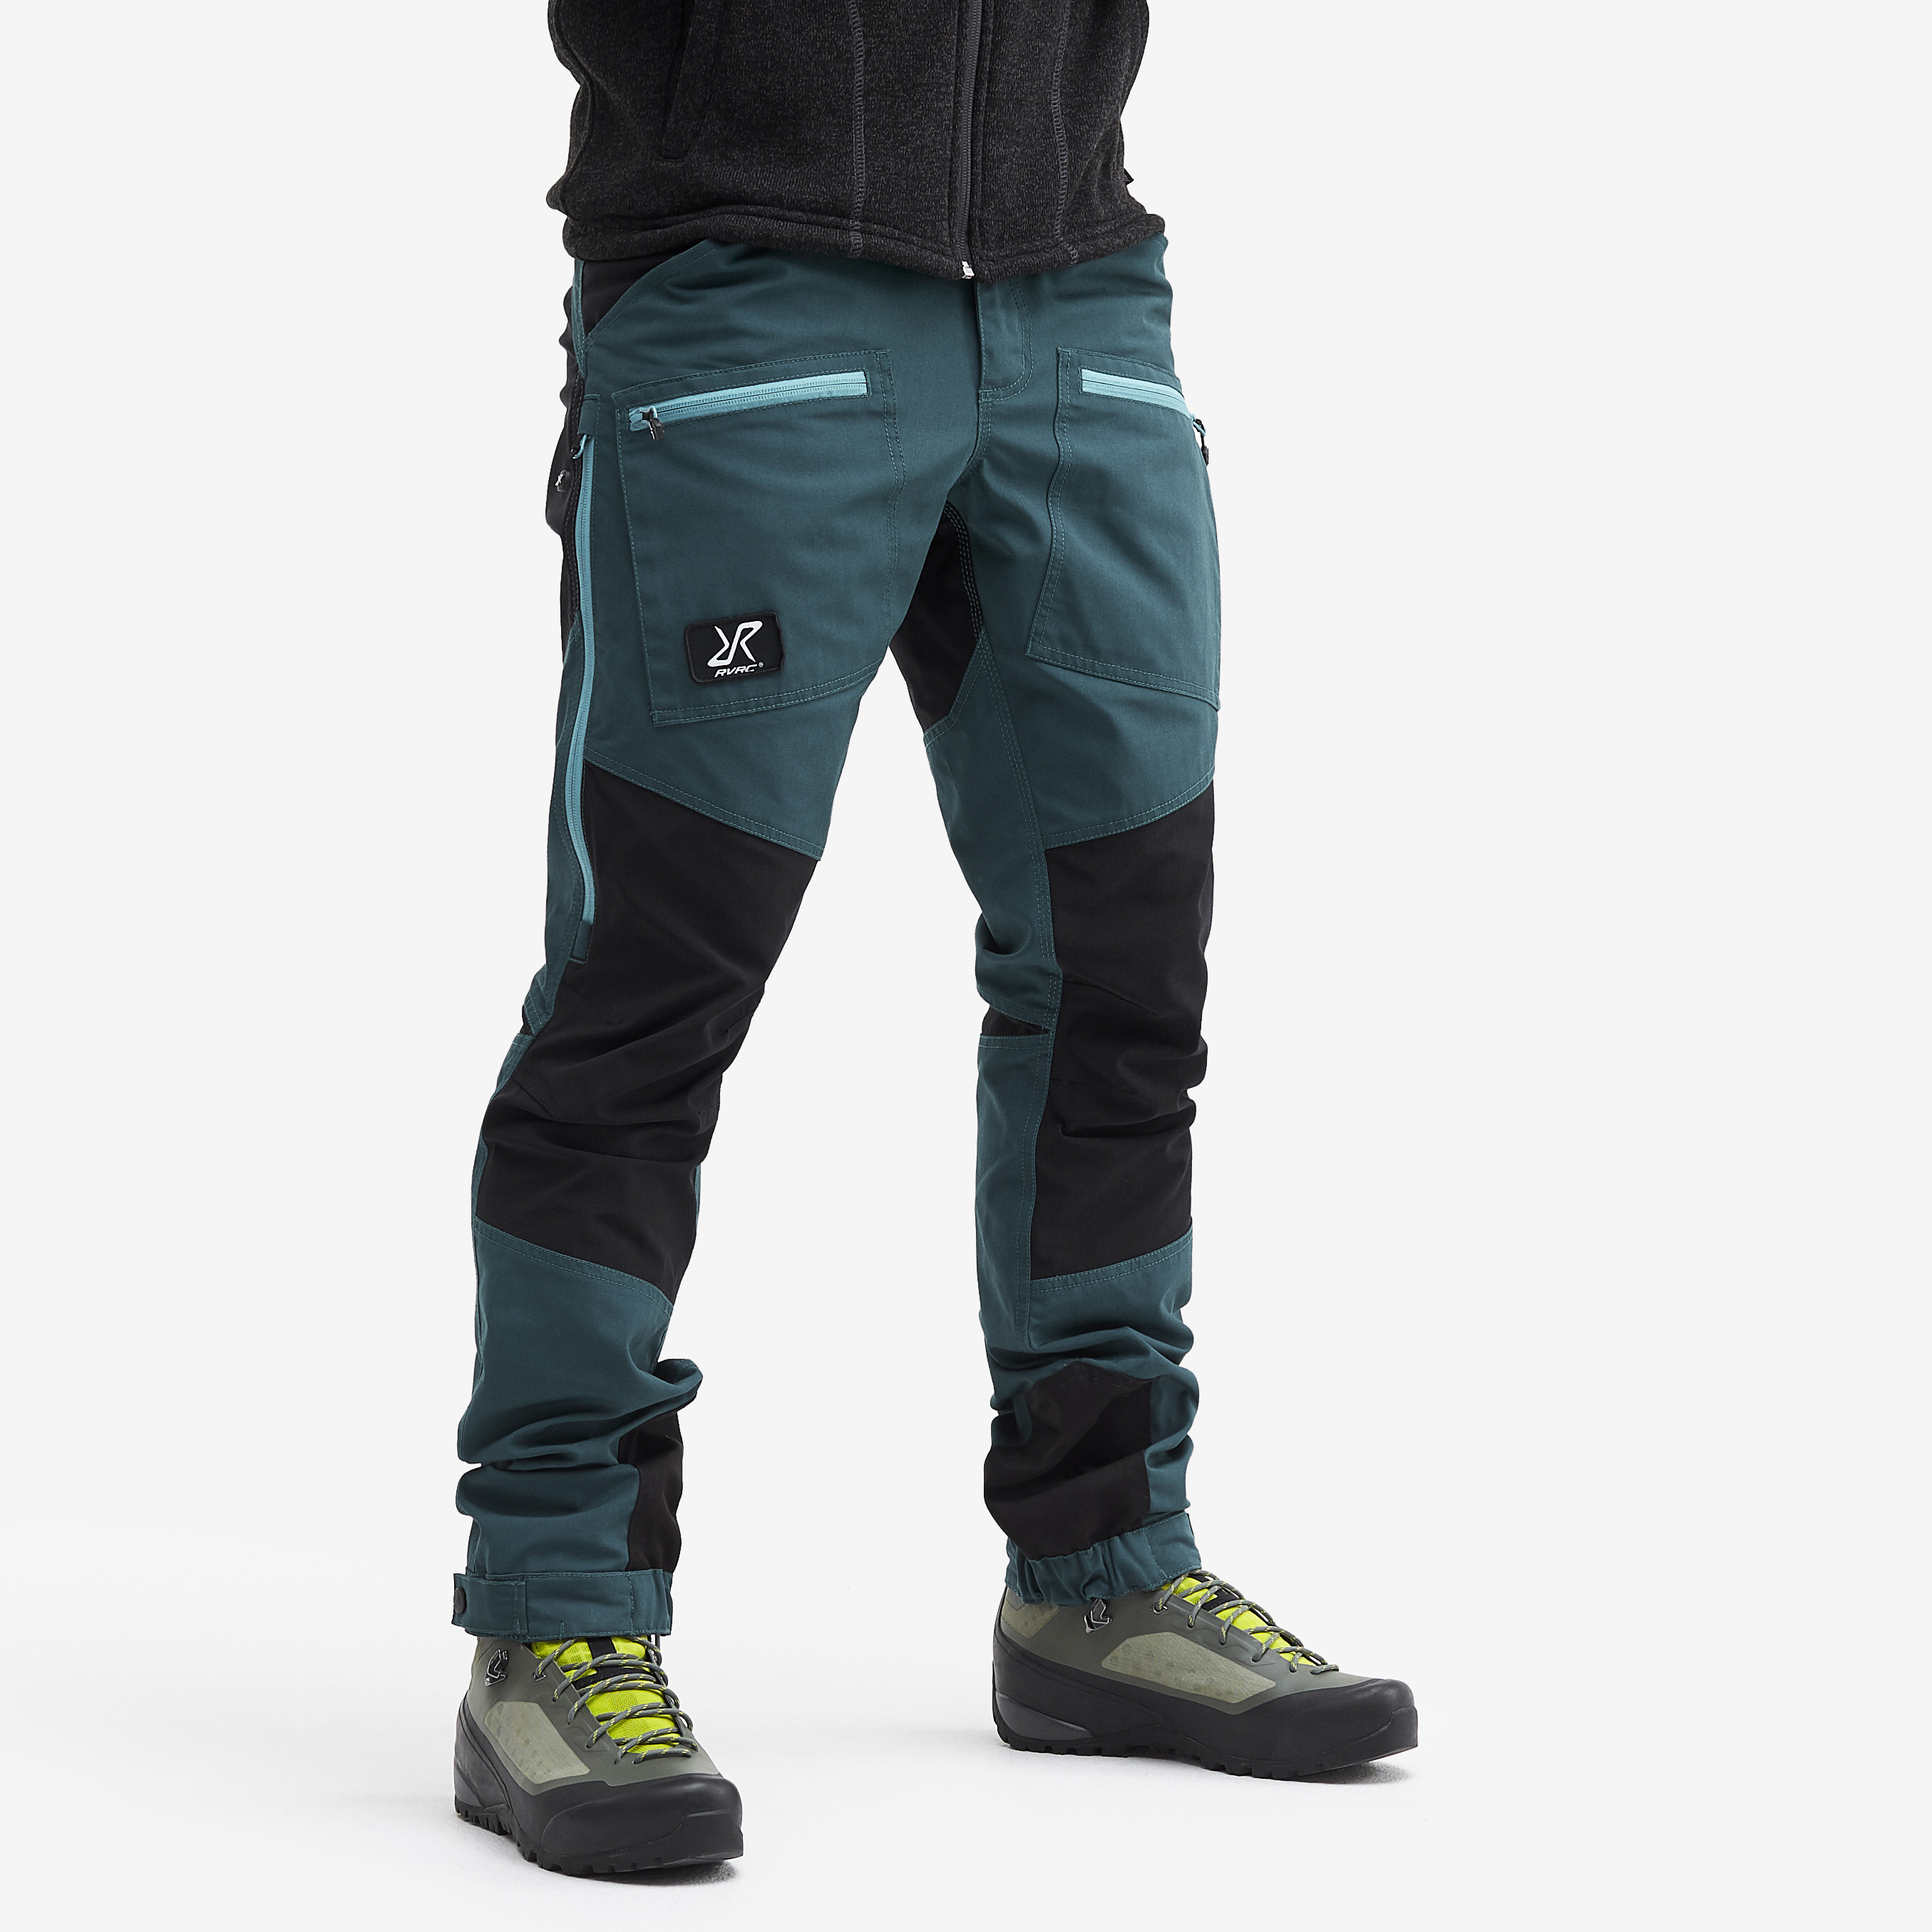 Nordwand Pro hiking trousers for men in dark blue